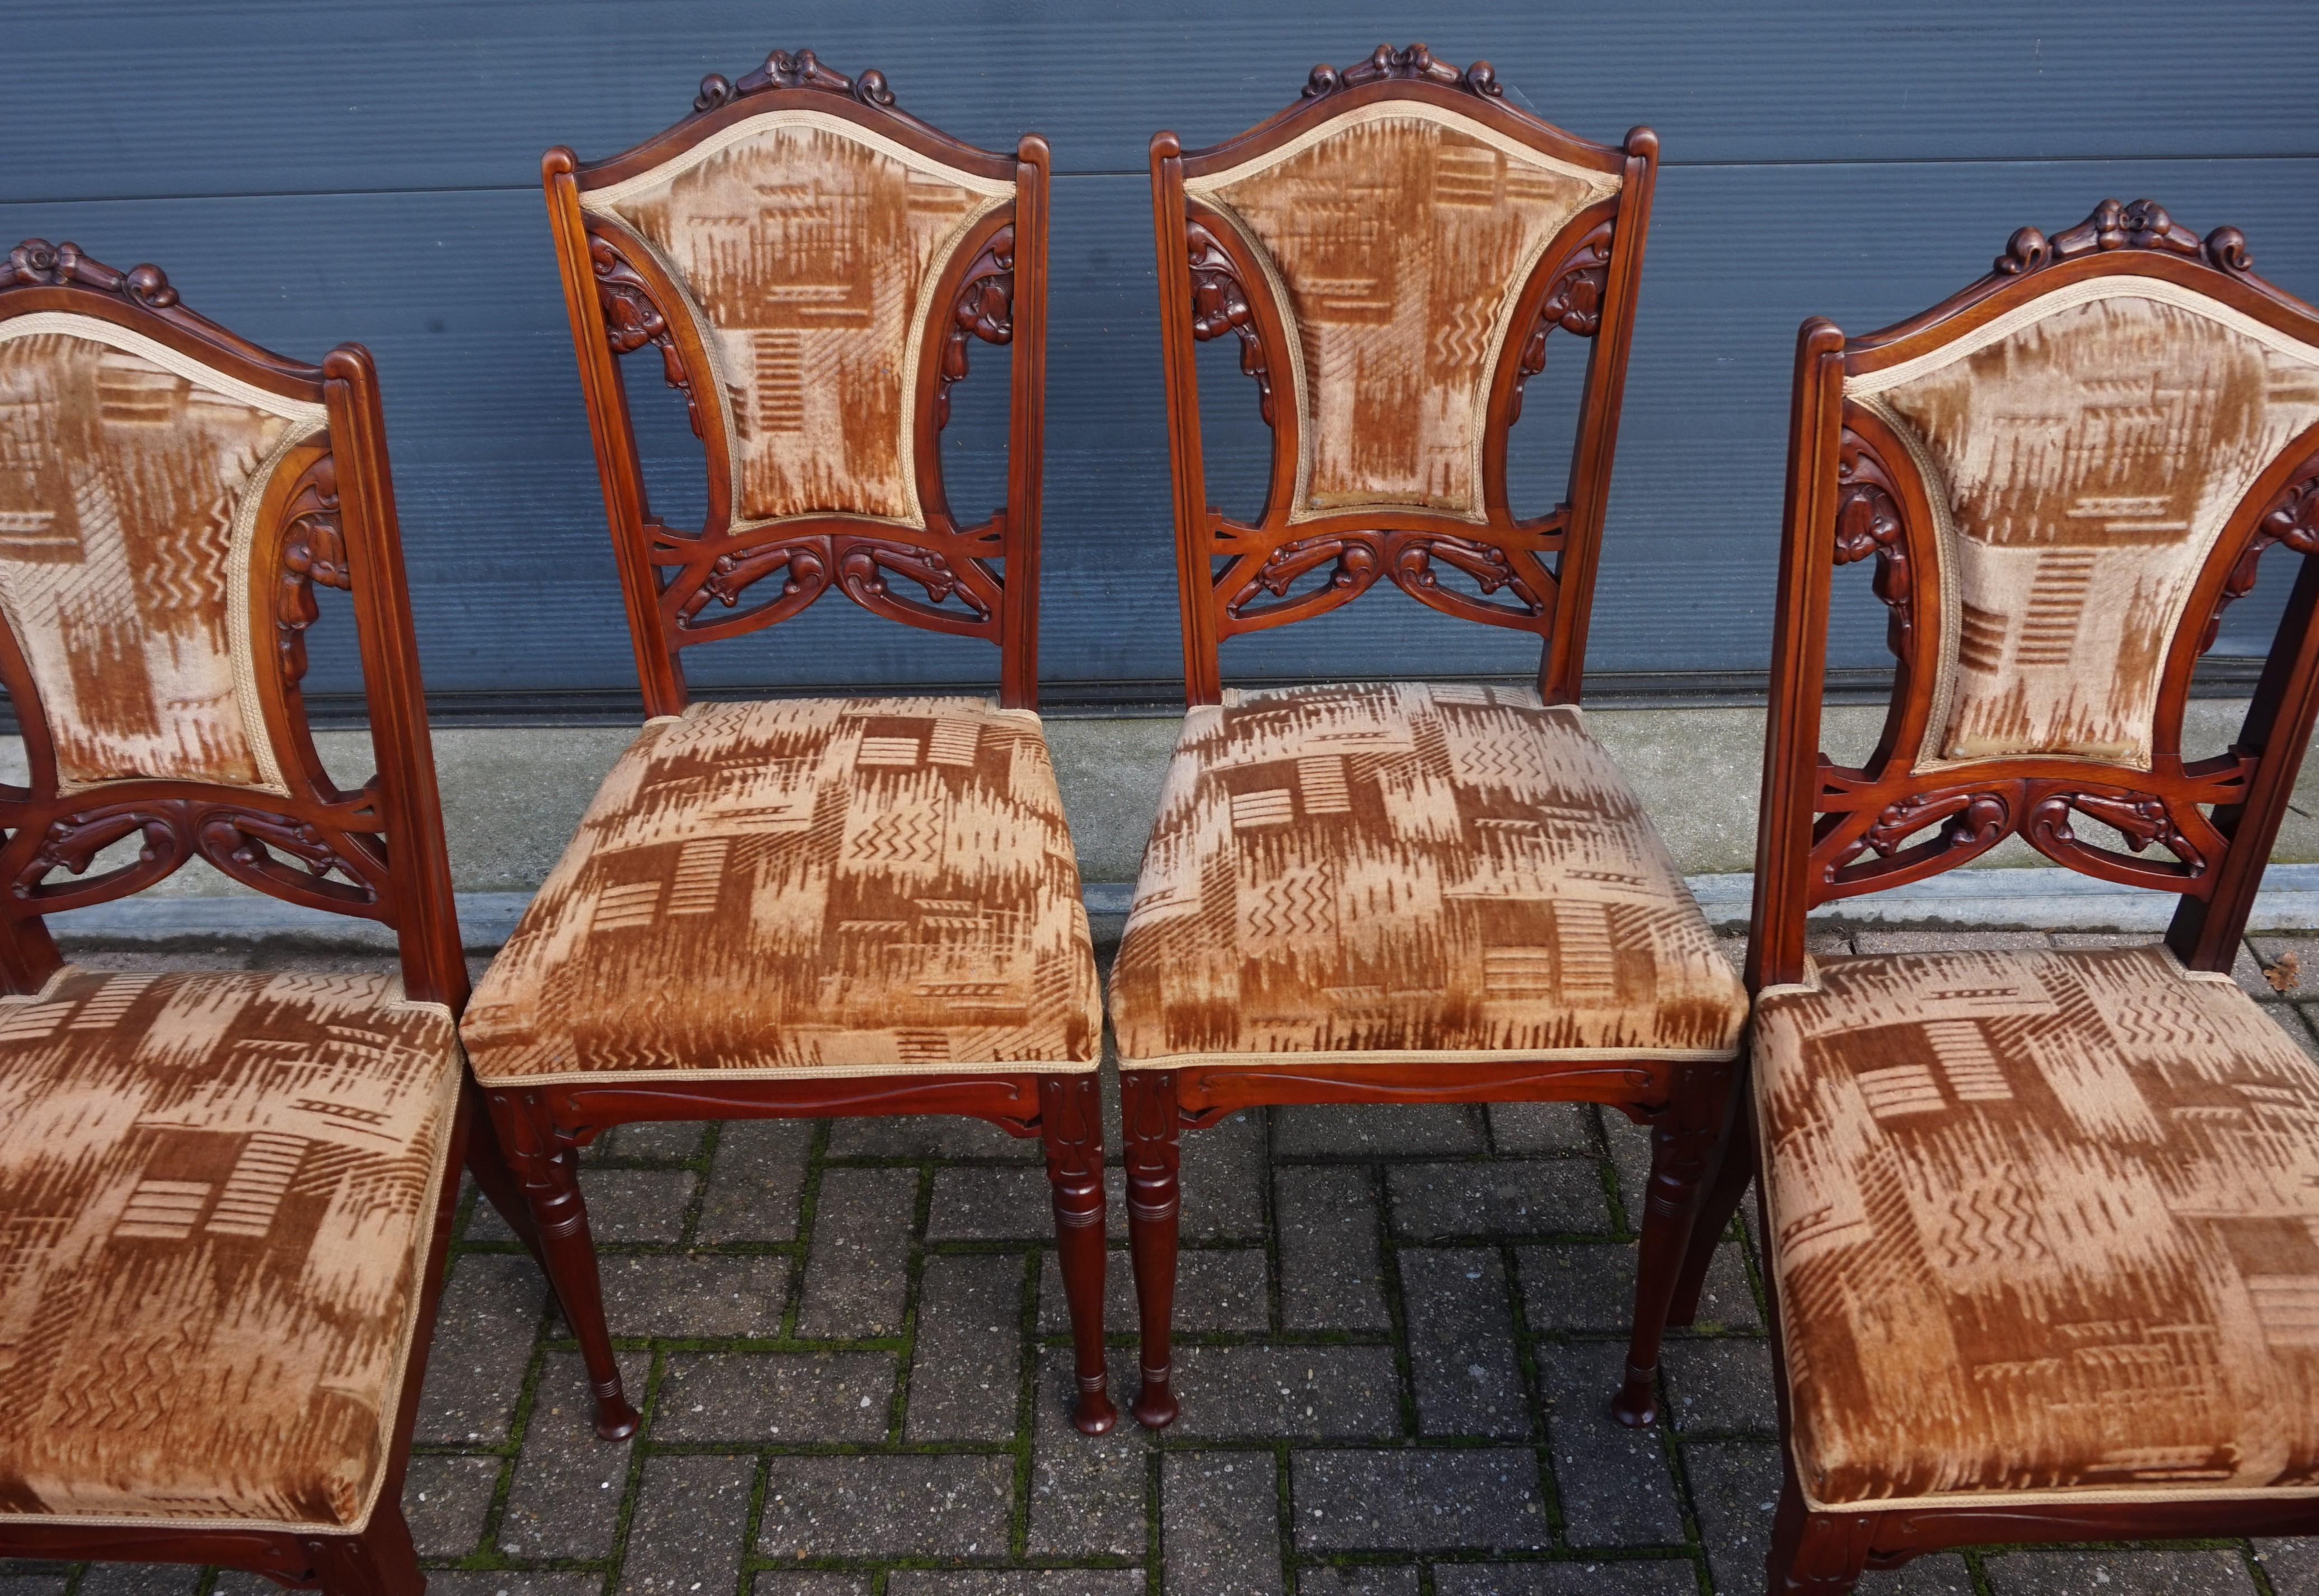 Set of 6 Art Nouveau chairs with stunning hand carved flower patterns.

The quality of the materials with which these Arts & Crafts chairs were made and also the quality of the workmanship that created, among other things, the decor of flowers in